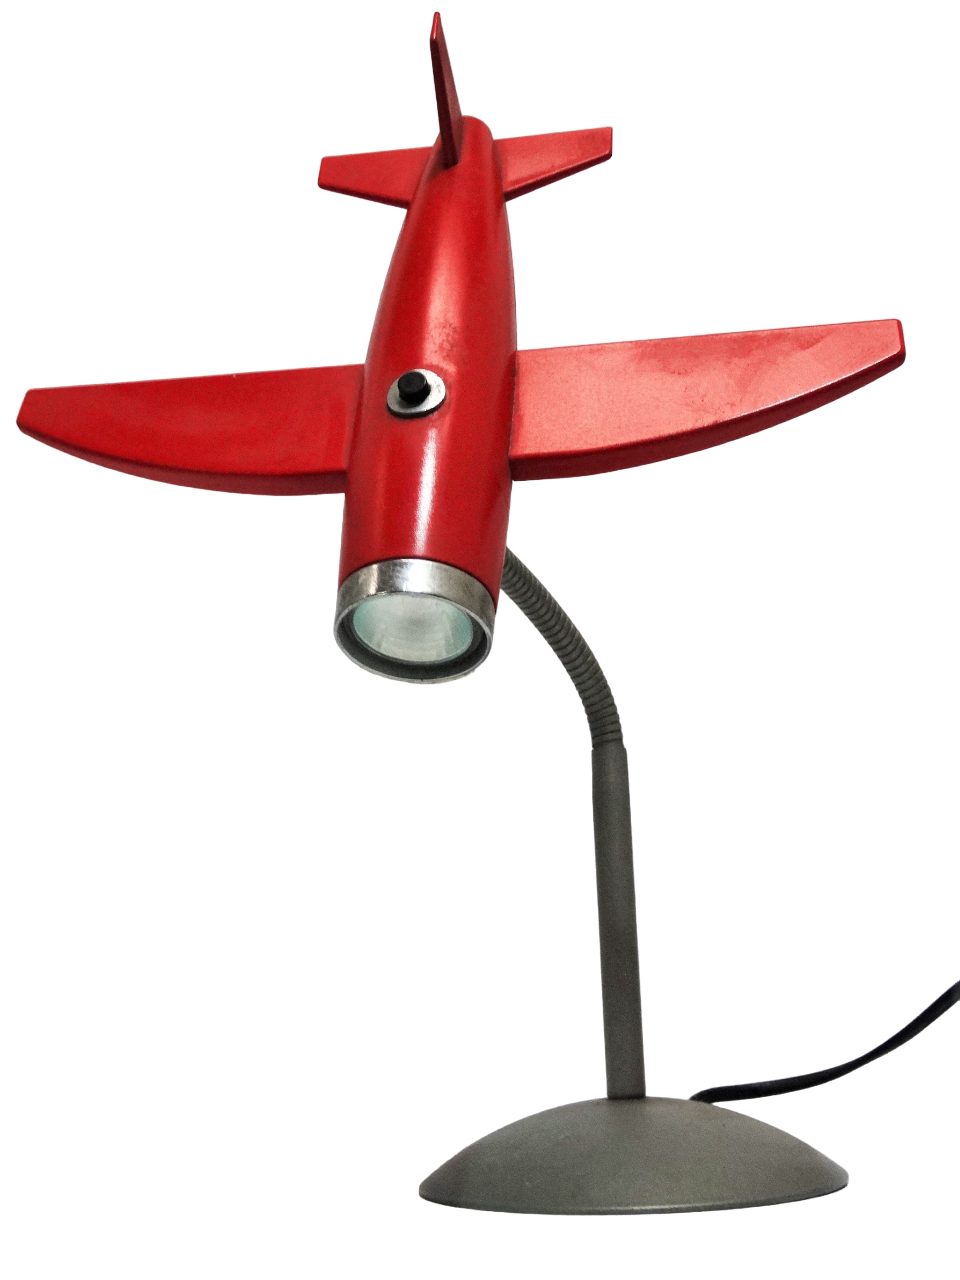 A 20th century desk lamp - modelled as a jet aircraft, height 32cm.